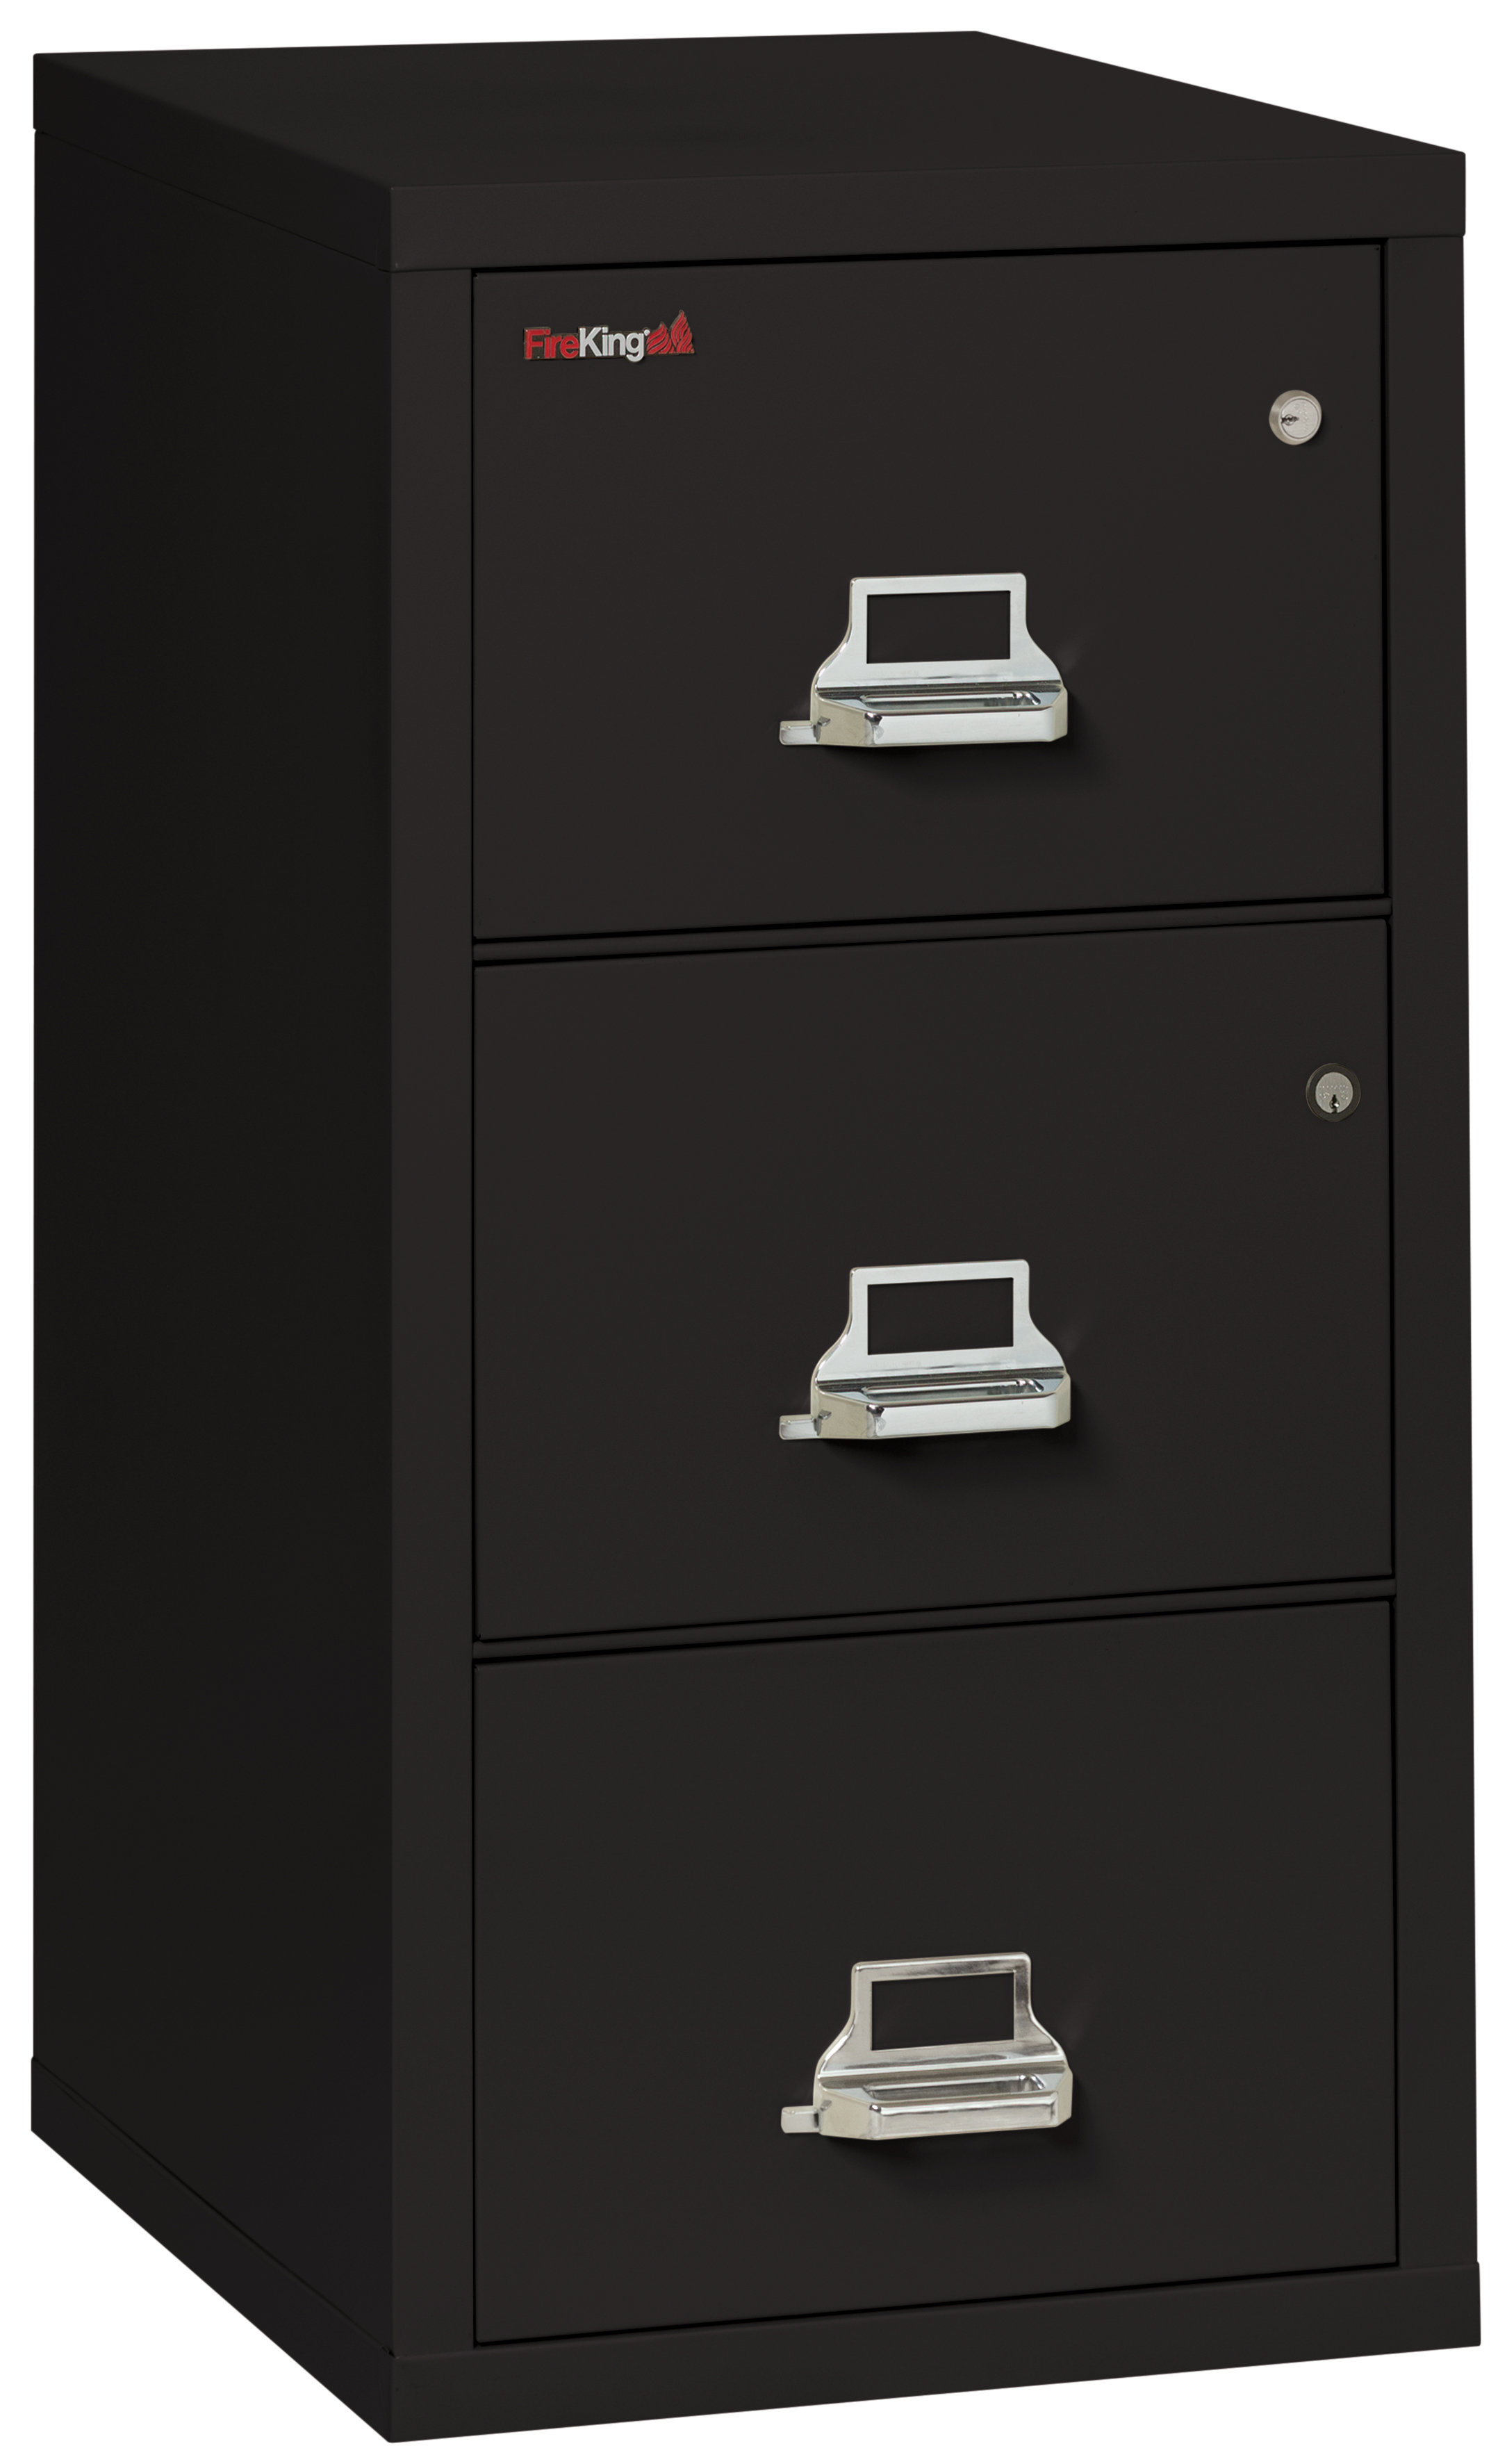 Fireking Legal Safe In A File Fireproof 3 Drawer Vertical File within dimensions 2169 X 3546